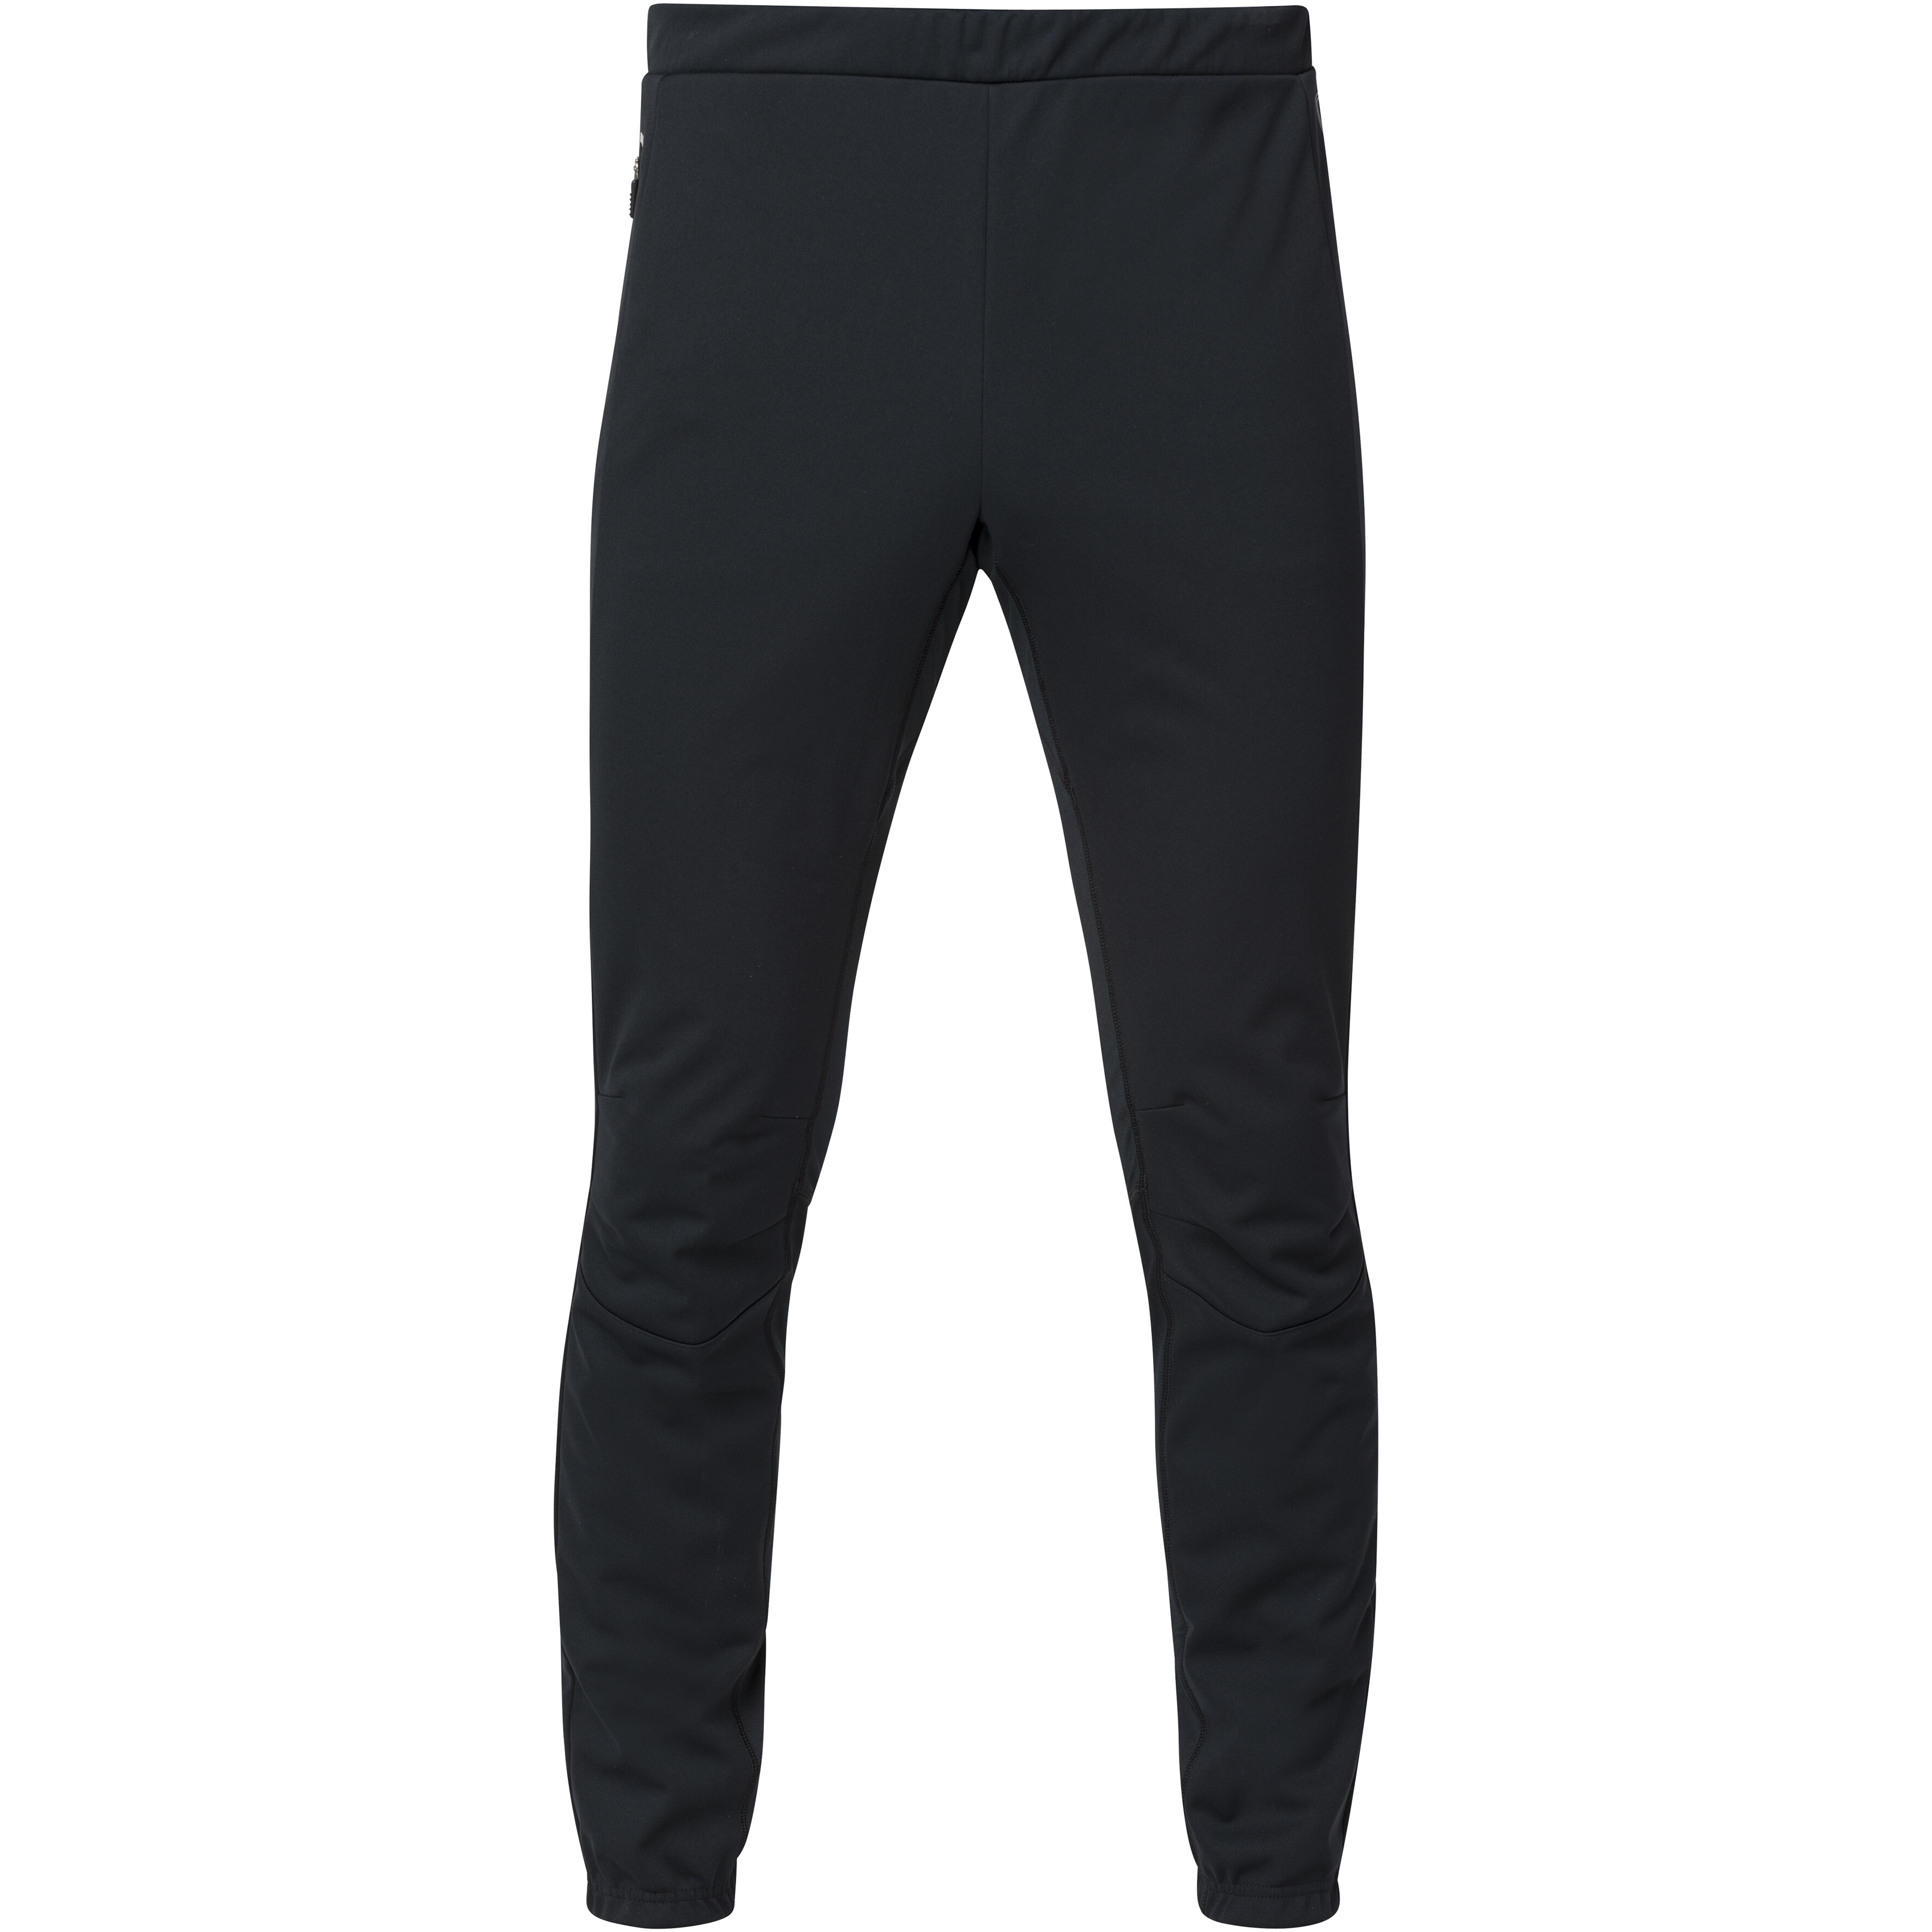 Better Bodies -Sweatpants from Better Bodies - Buy the Bronx track pants in  our shop